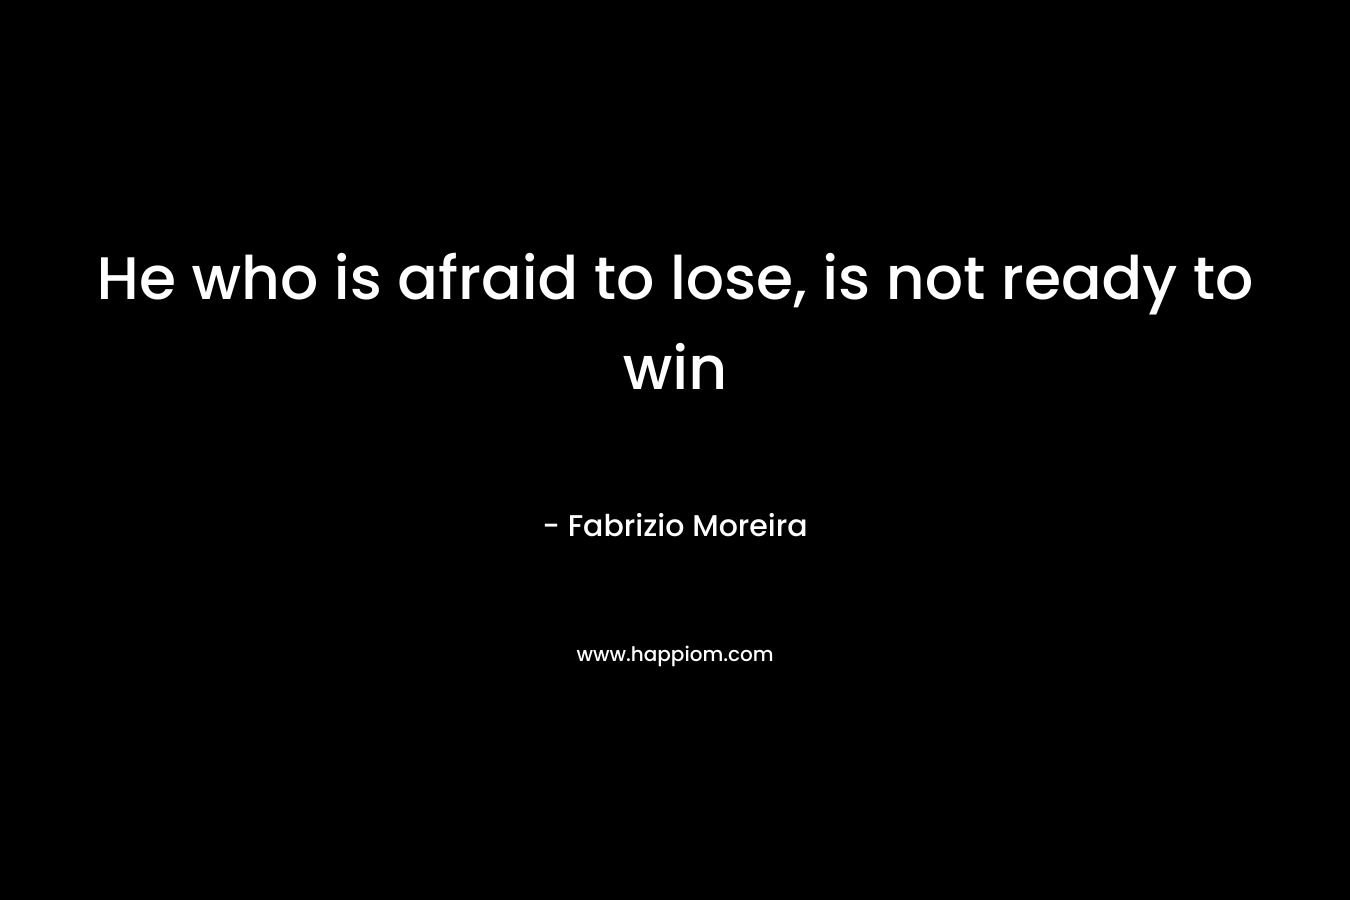 He who is afraid to lose, is not ready to win